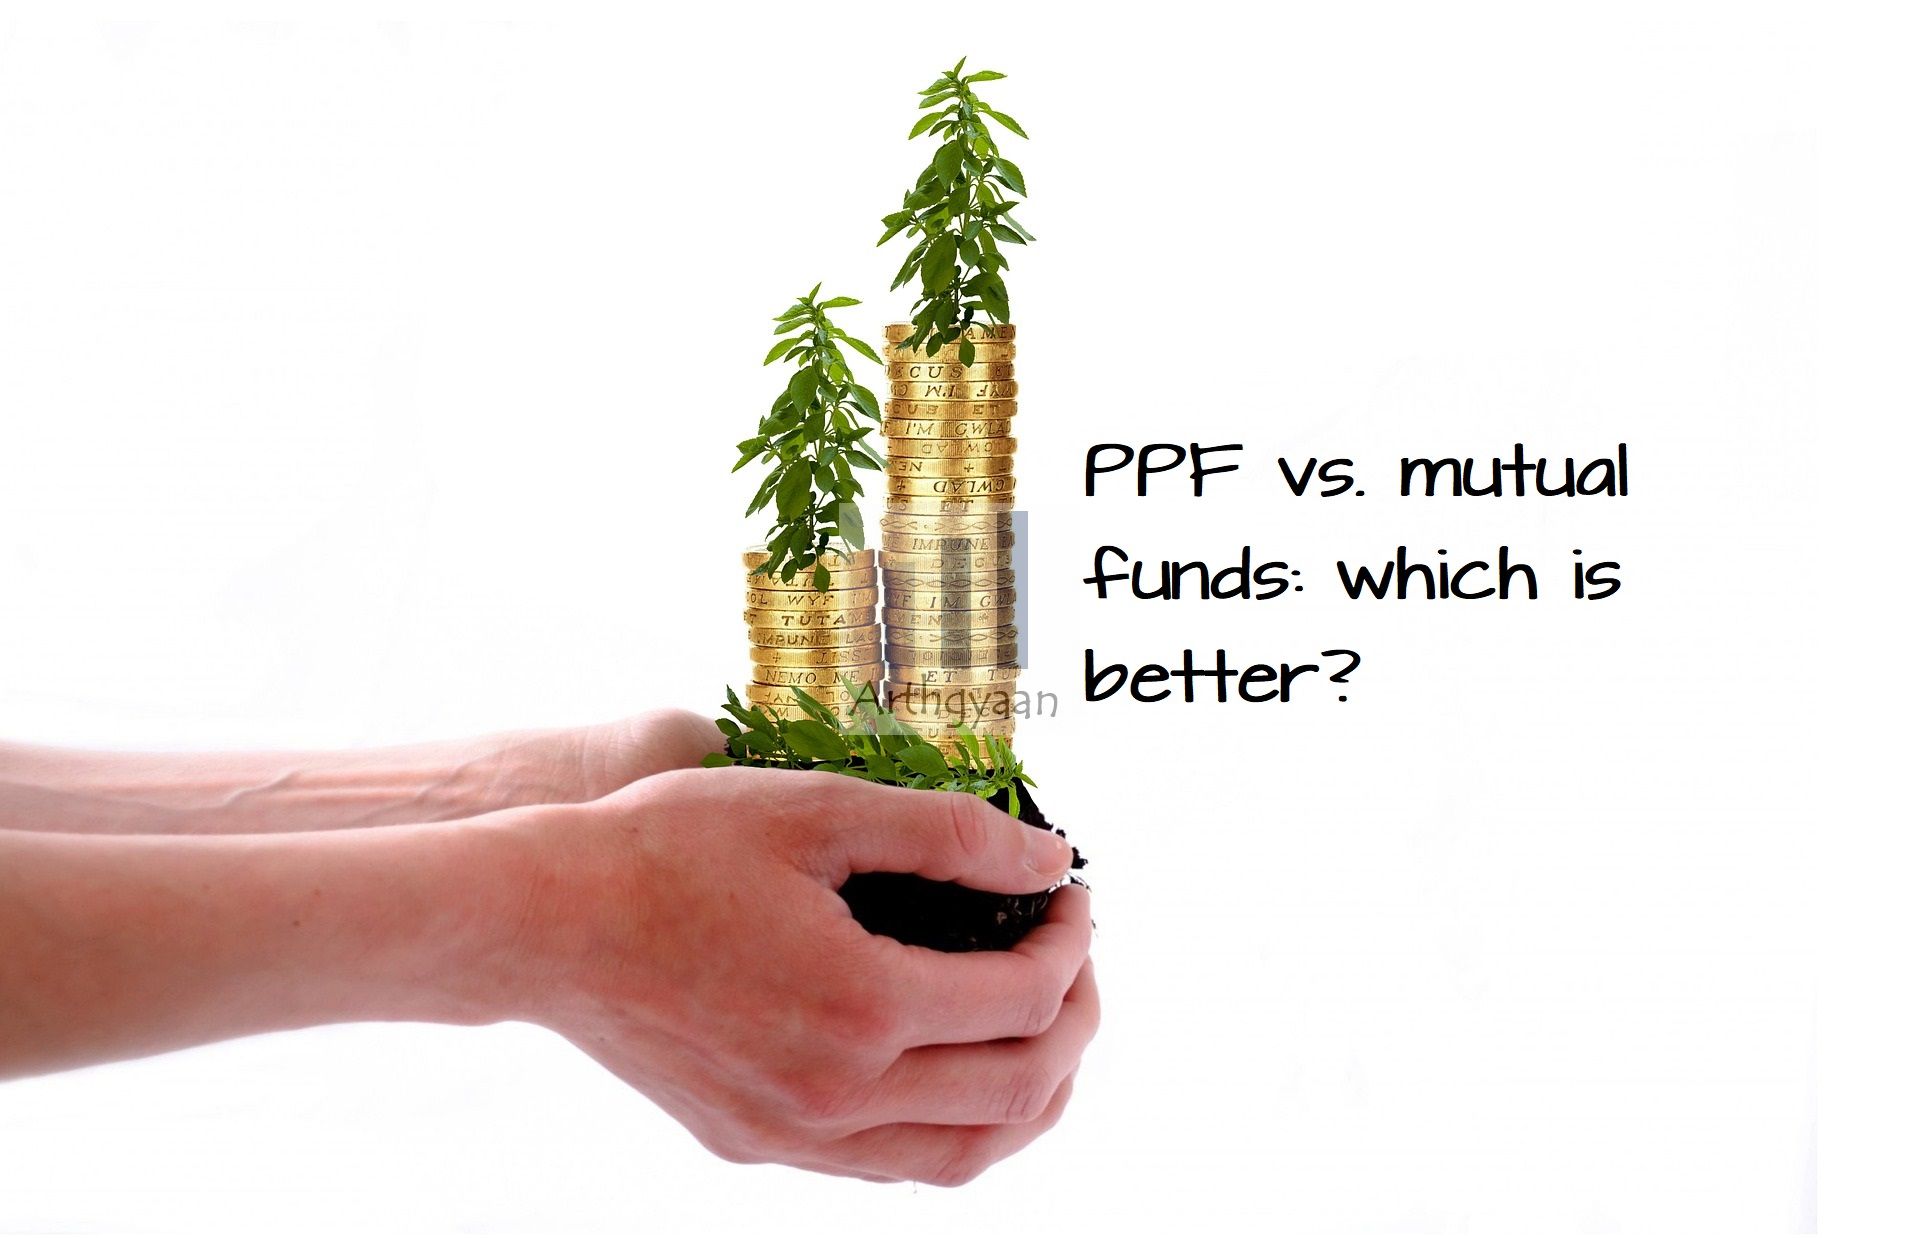 <p>The article presents a historical analysis of investing in stocks vs. PPF since 1979.</p>

